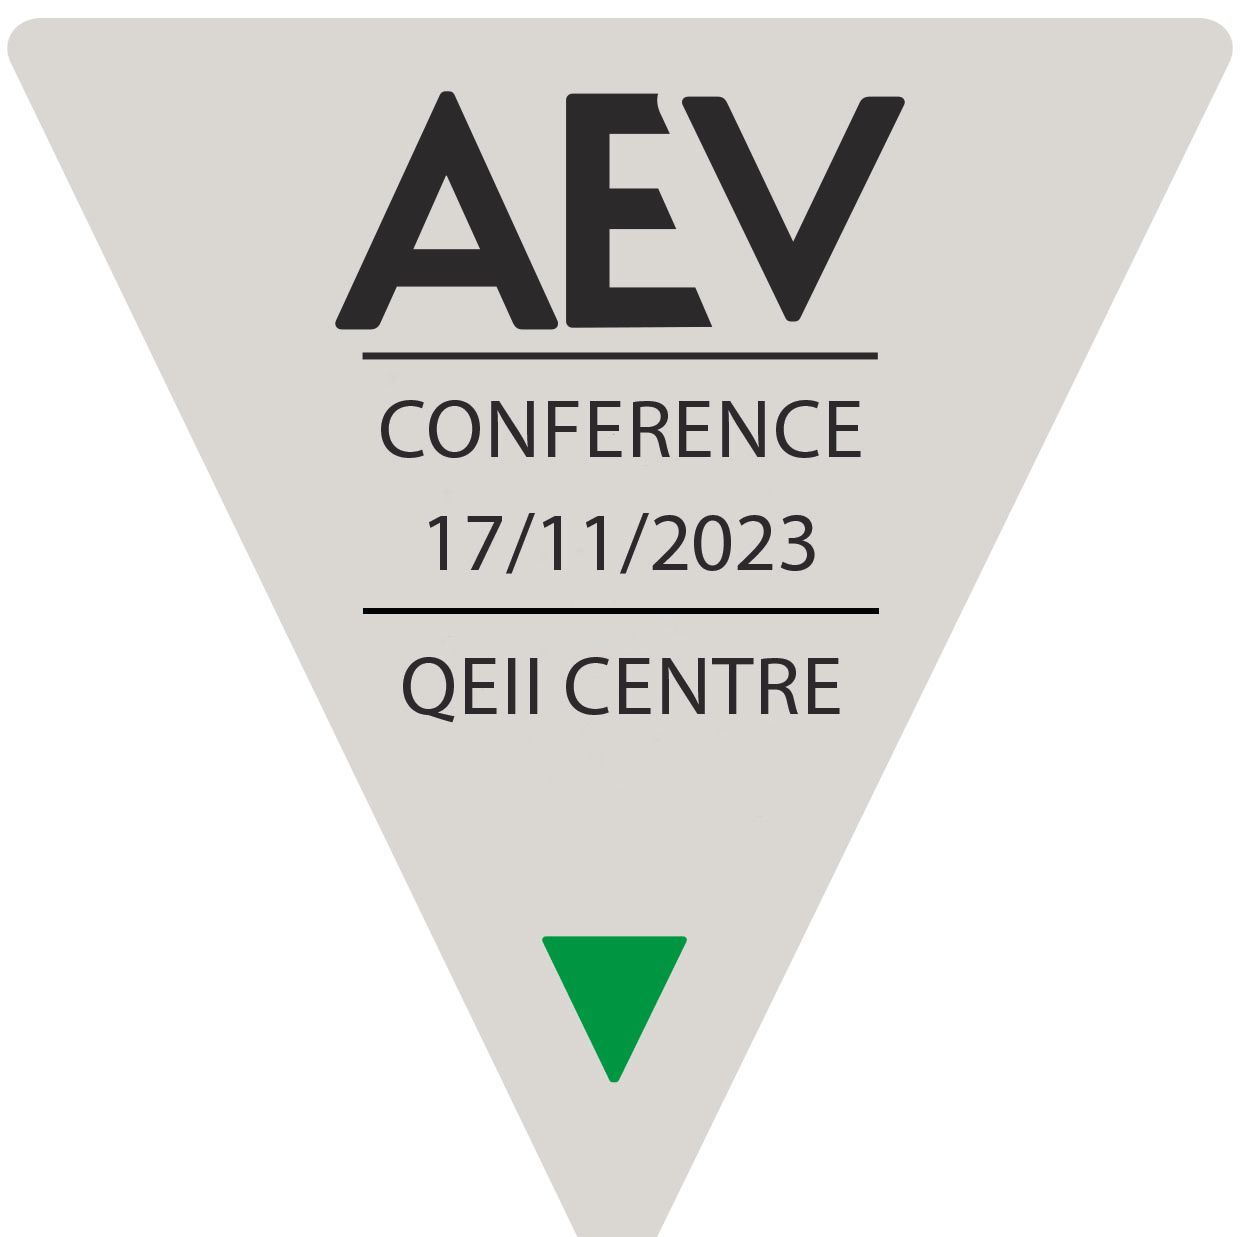 AEV conference 2023 announced